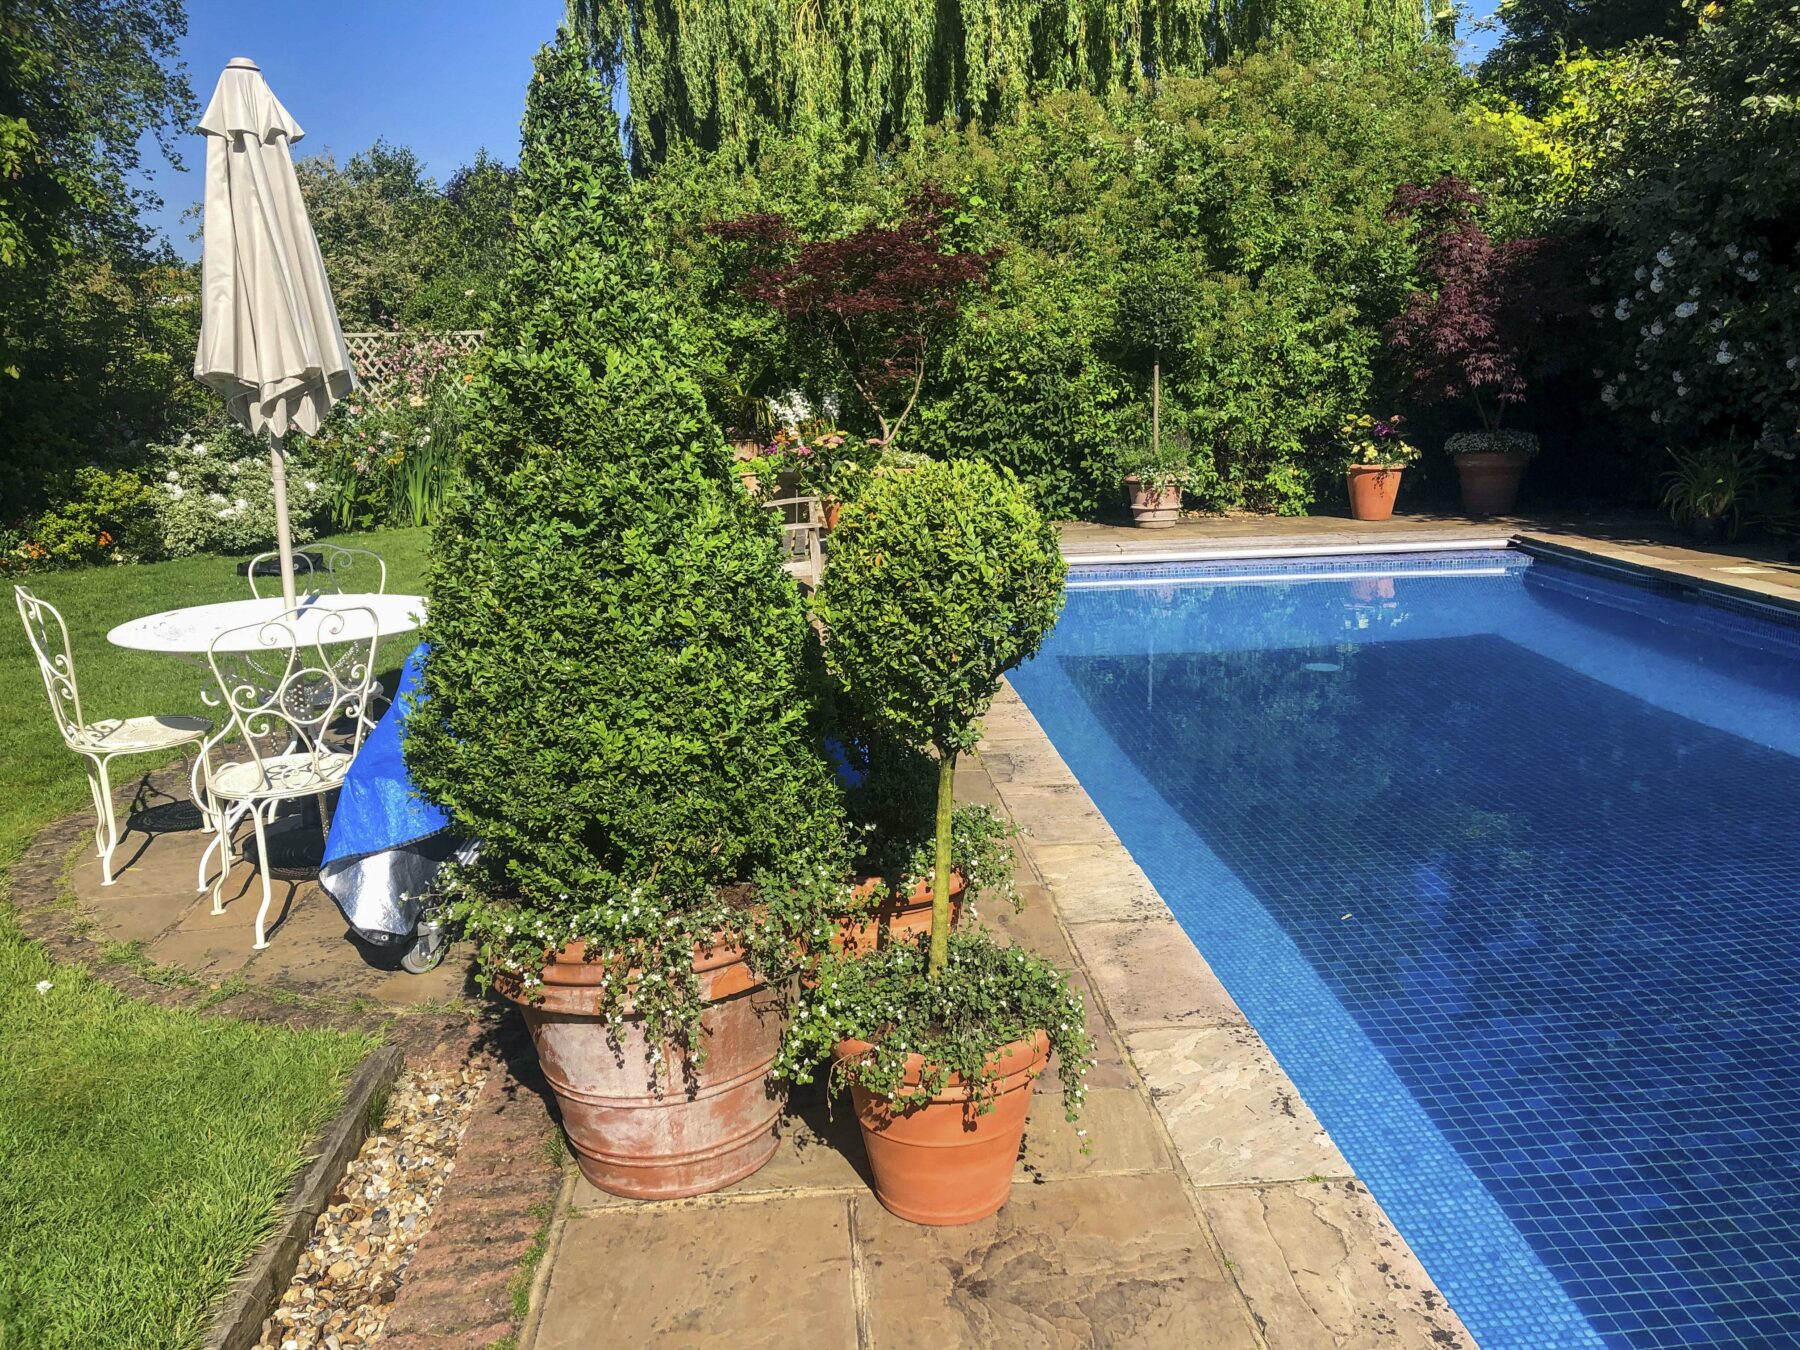 Terracotta pots garden swimming pool trees furniture filming location TV filming hire lodge London 21